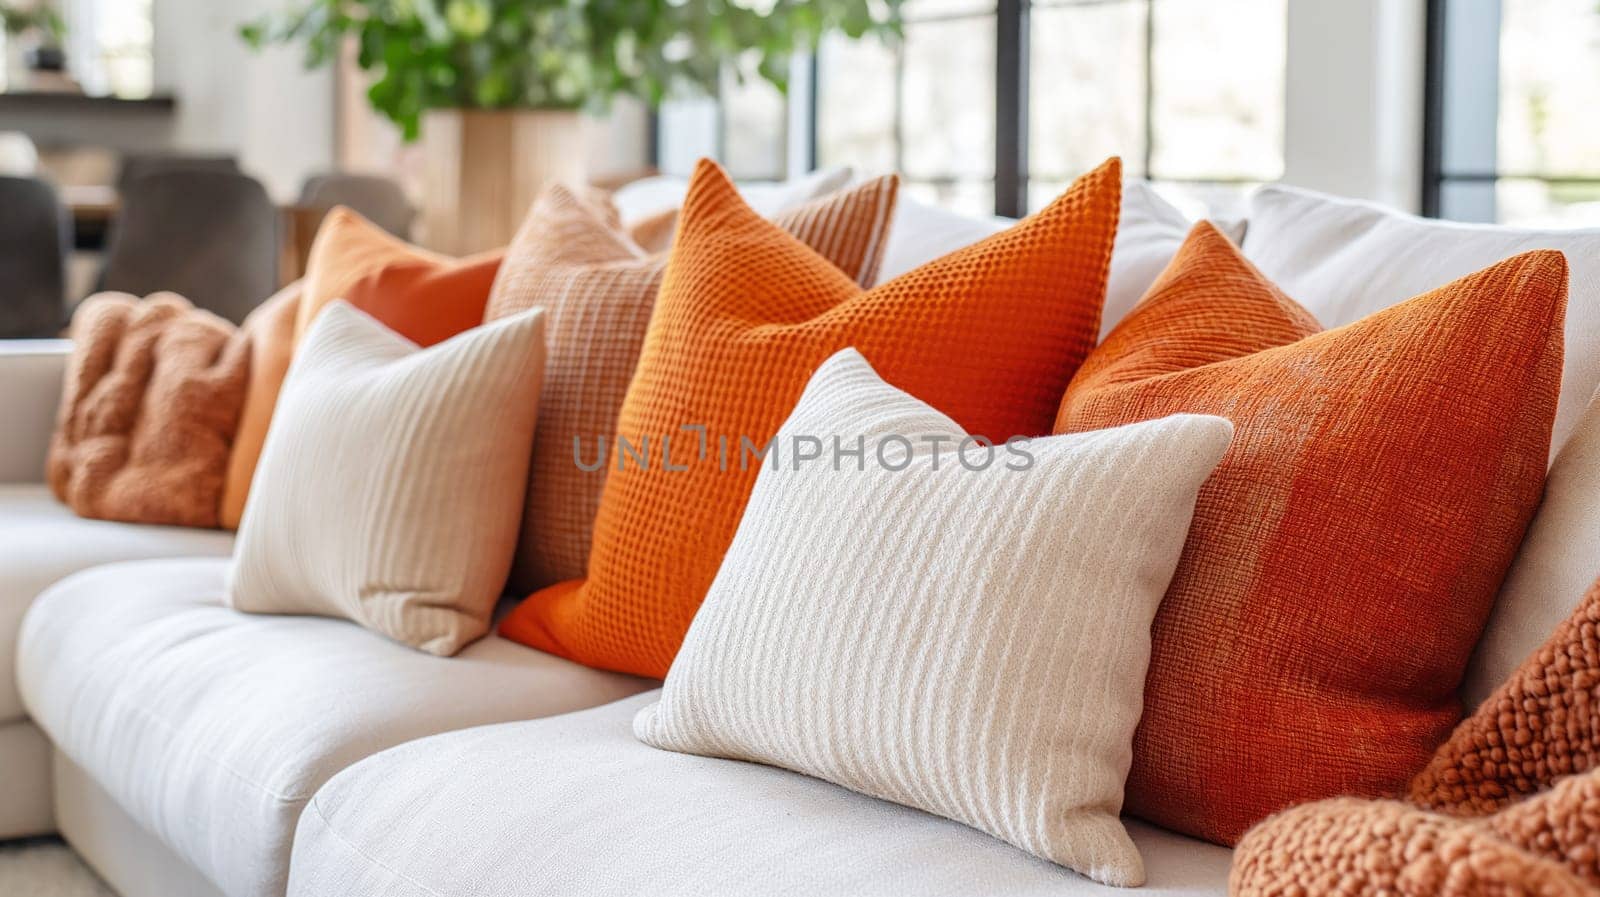 Sofa with pillows close-up in the living room by NataliPopova